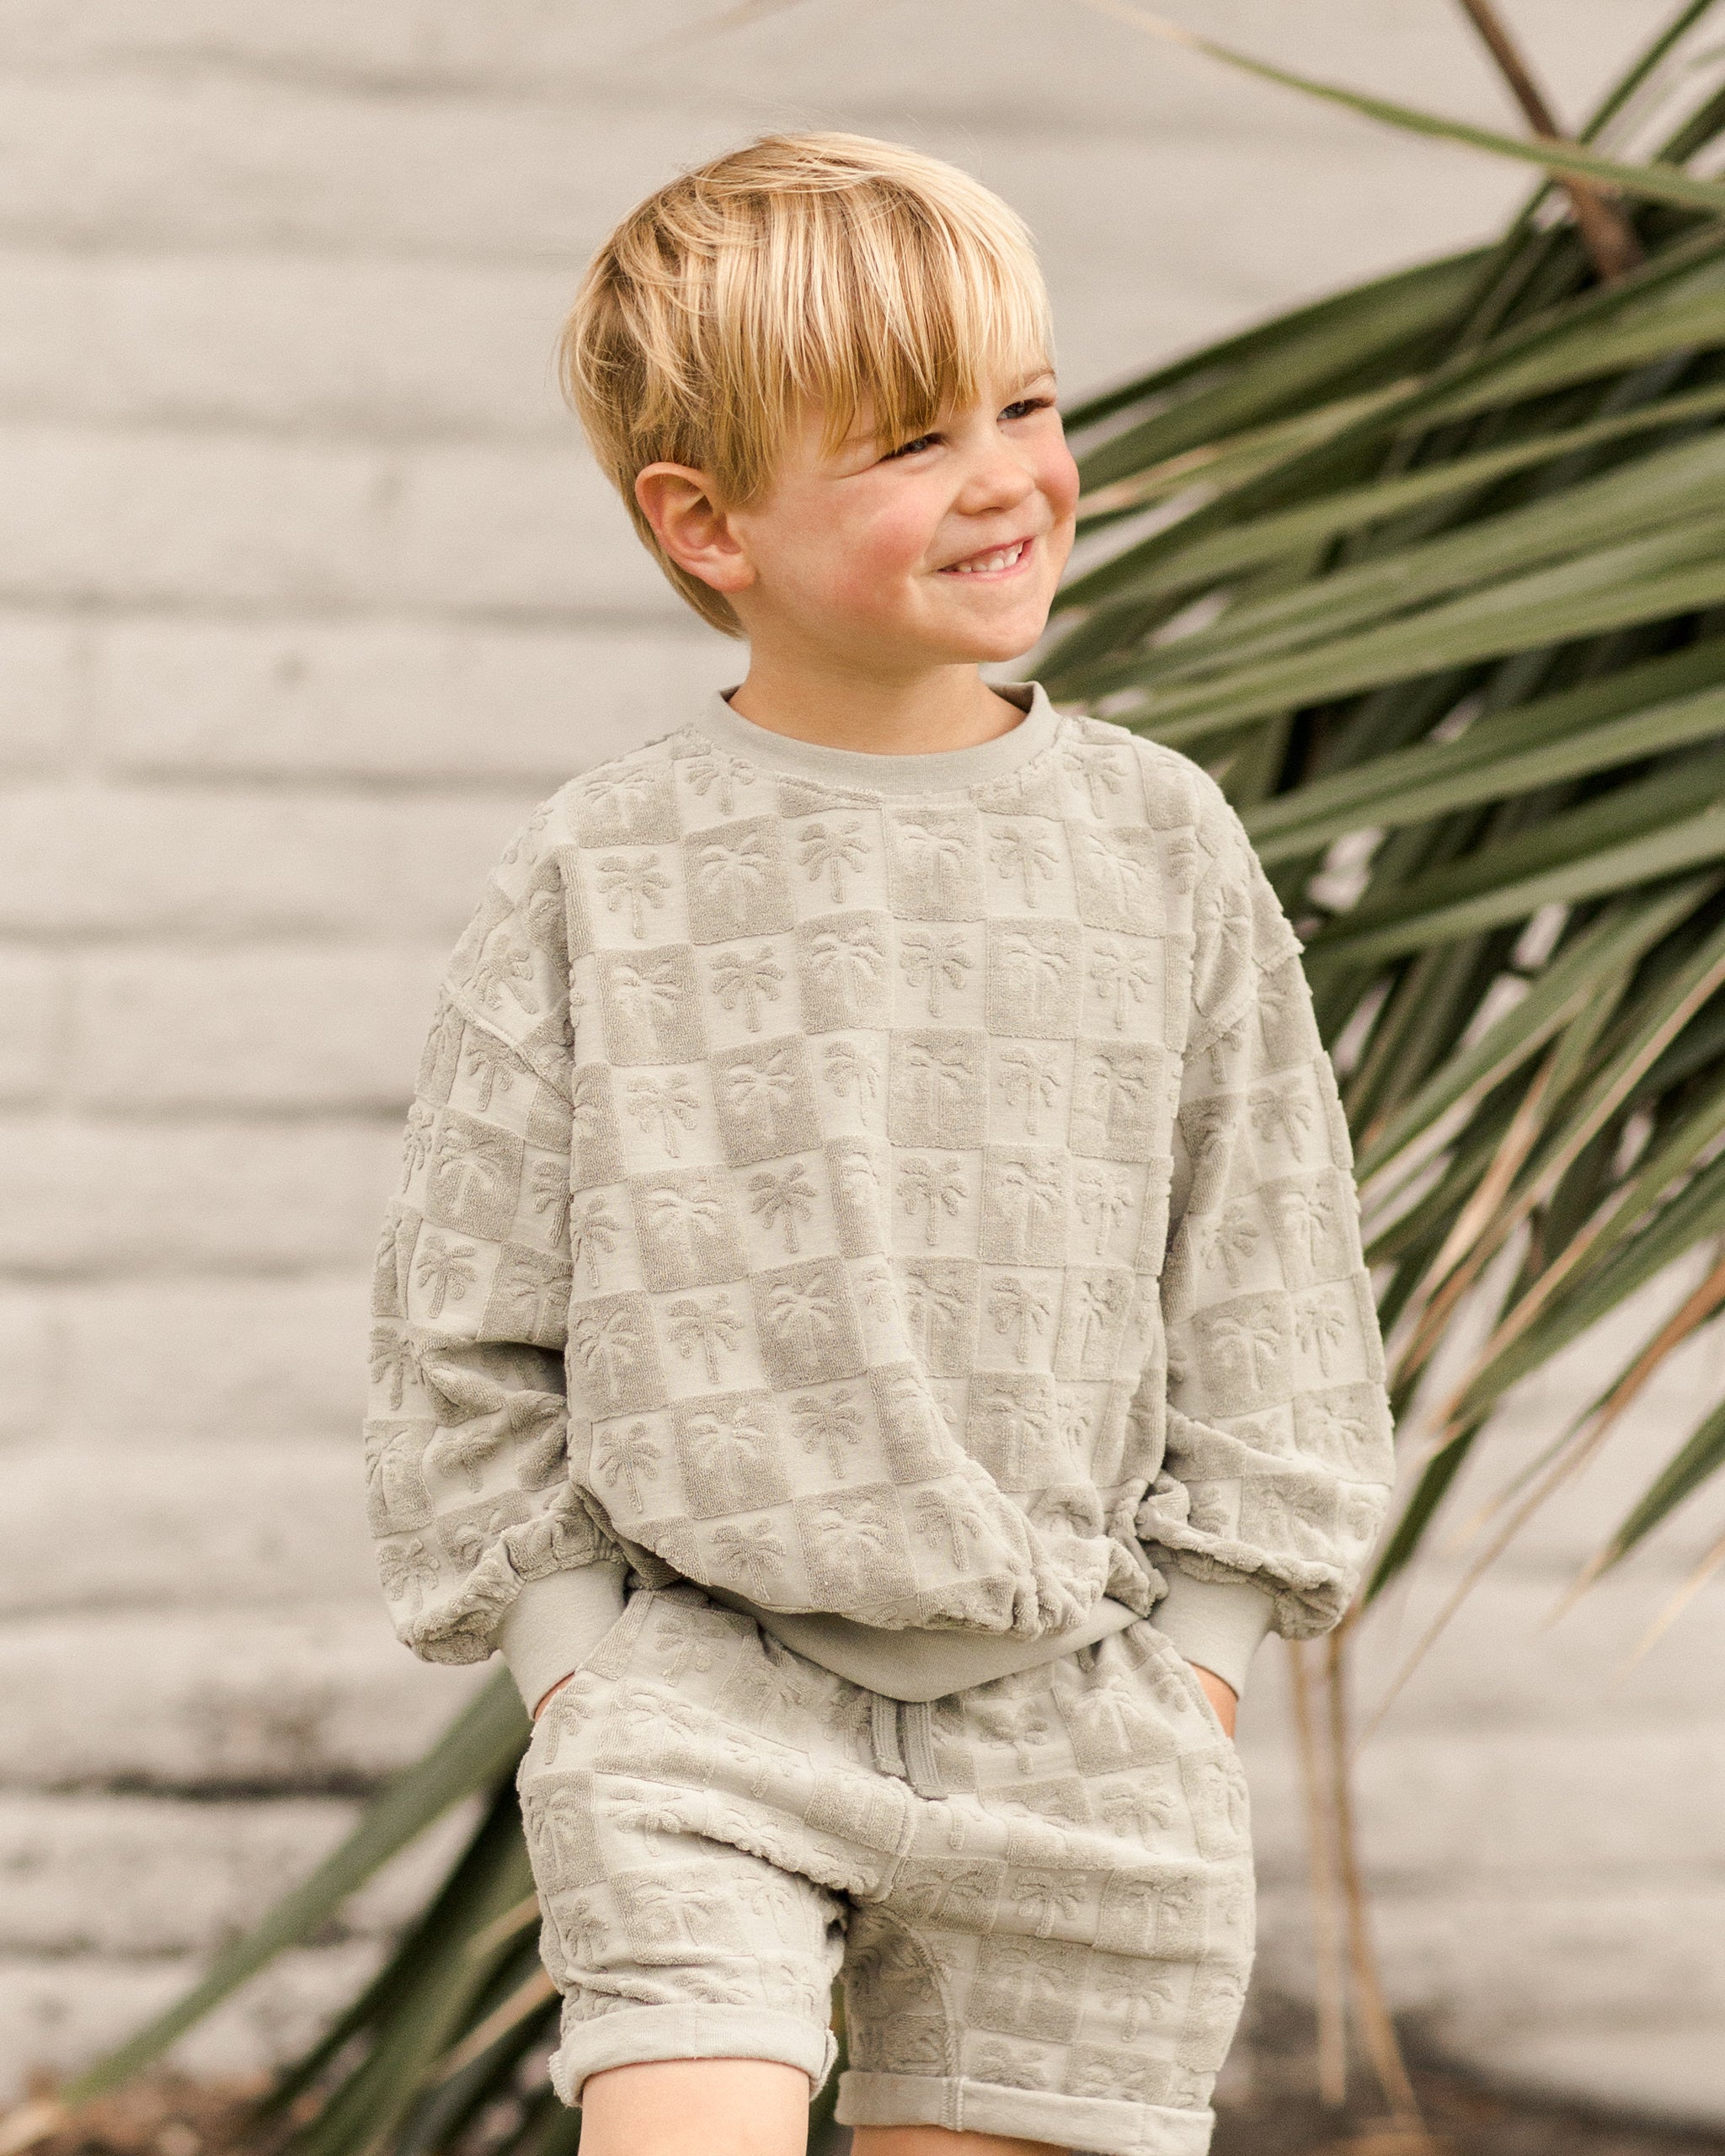 Sweatshirt || Palm Check - Rylee + Cru | Kids Clothes | Trendy Baby Clothes | Modern Infant Outfits |